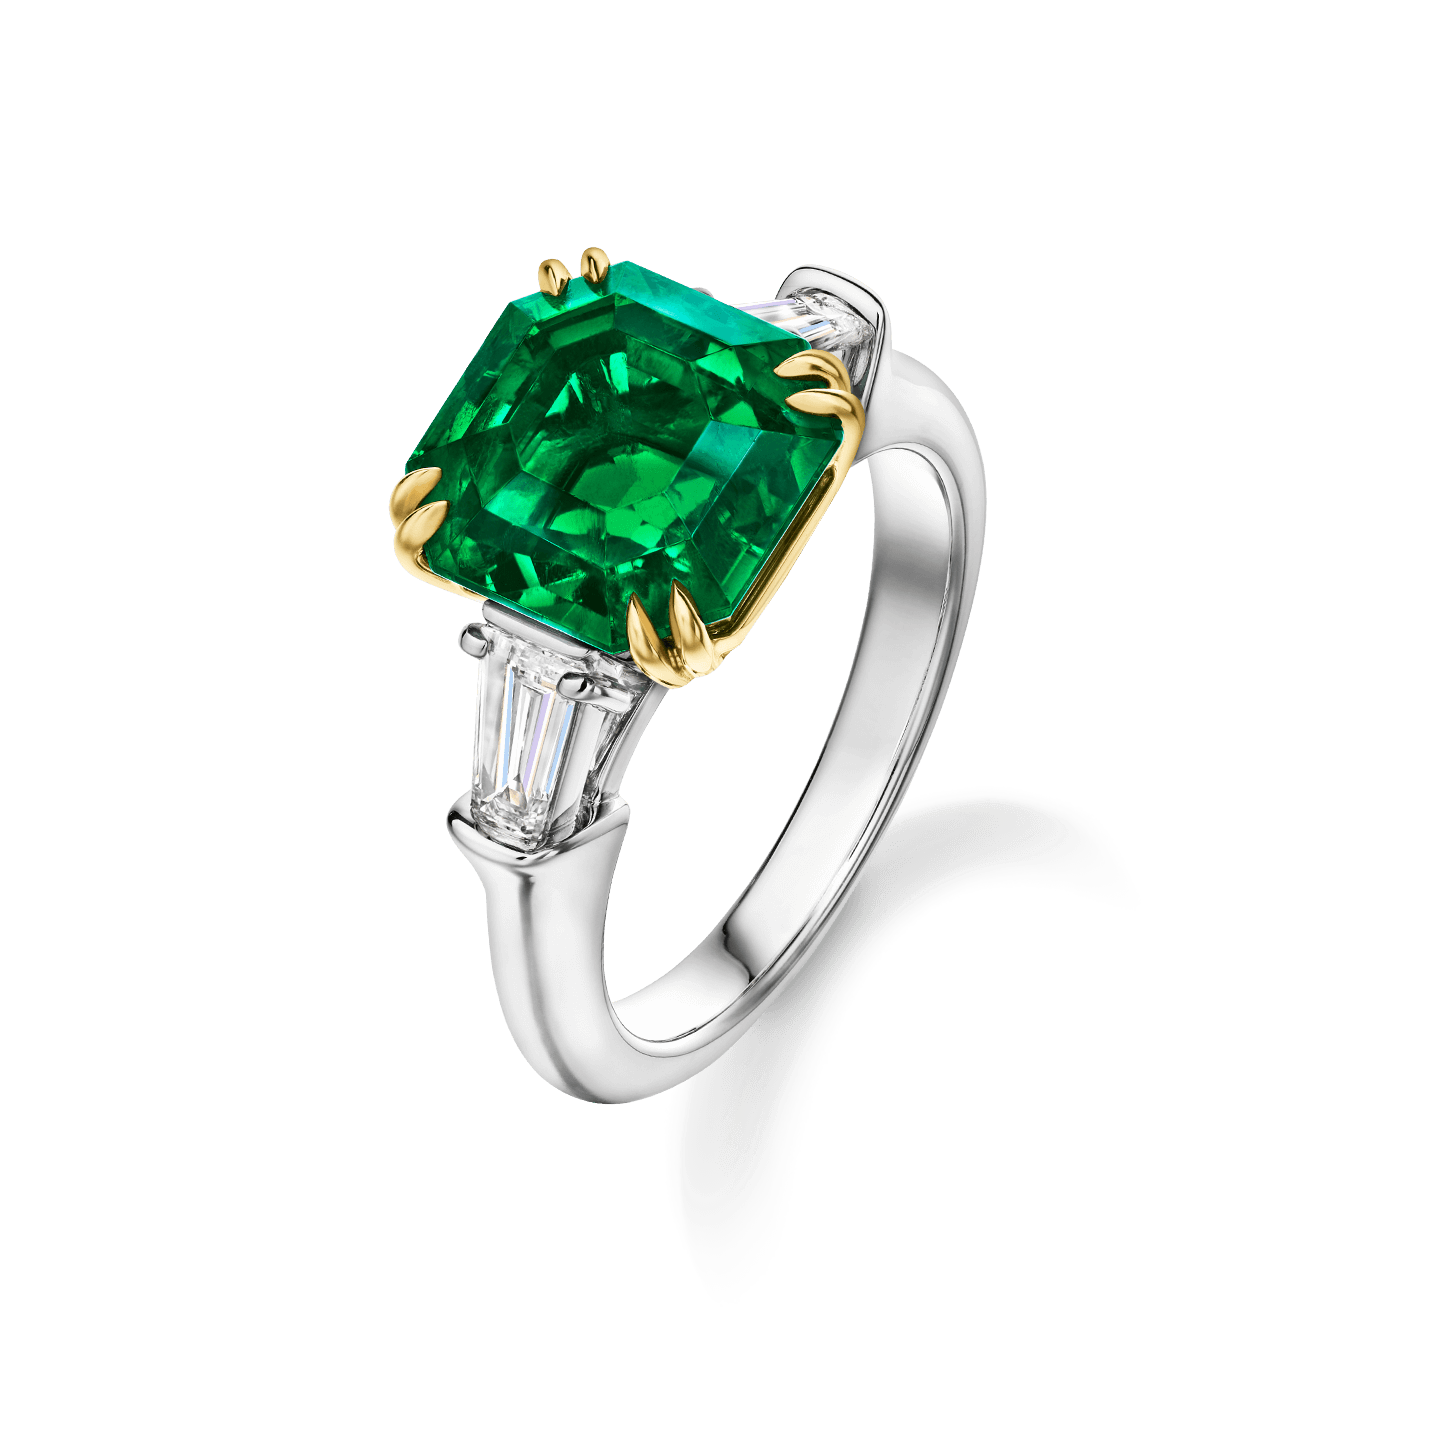 Angled view of the Classic Winston Emerald-Cut Emerald Ring